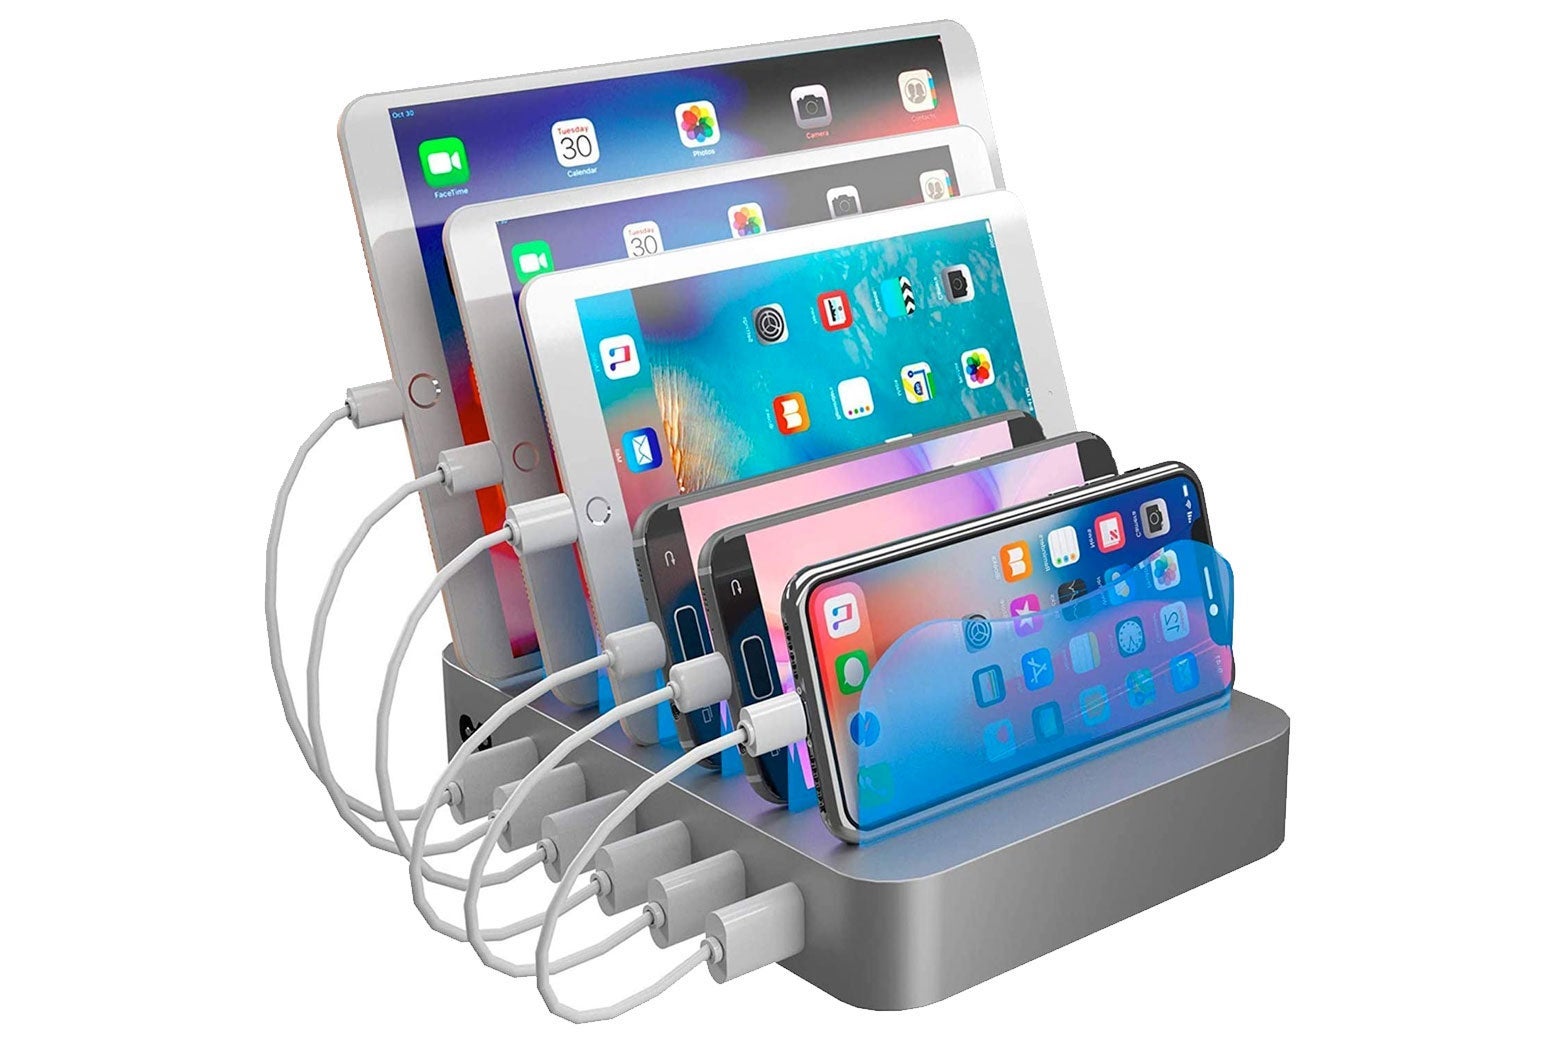 Charging station with several tablets and smartphones docked in it